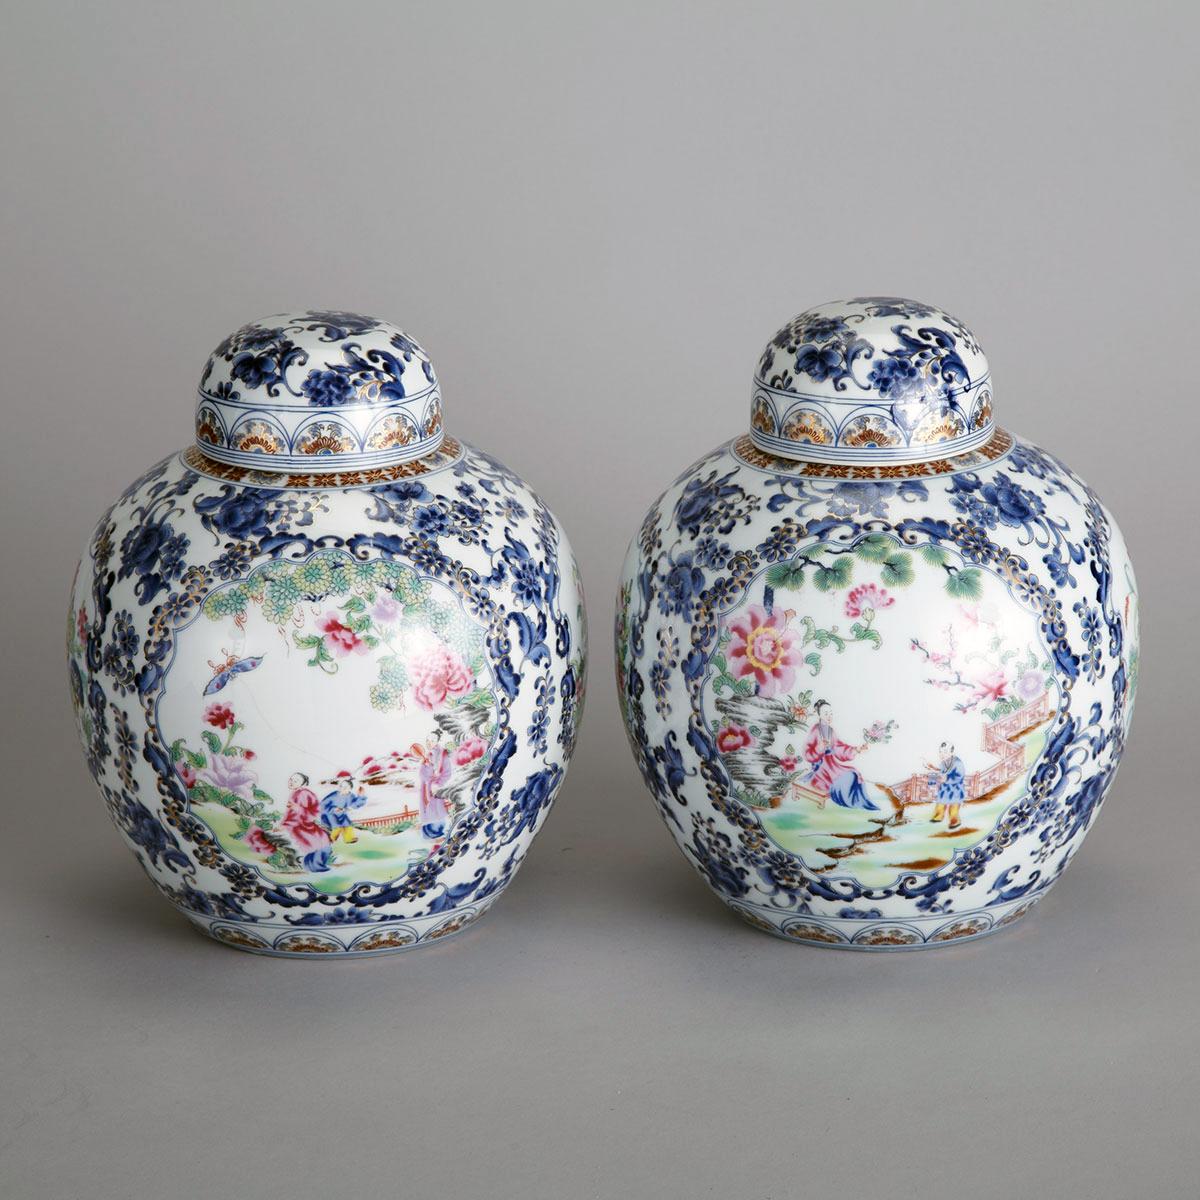 Pair of Export-Style Blue, White, and Famille Rose Ginger Jars